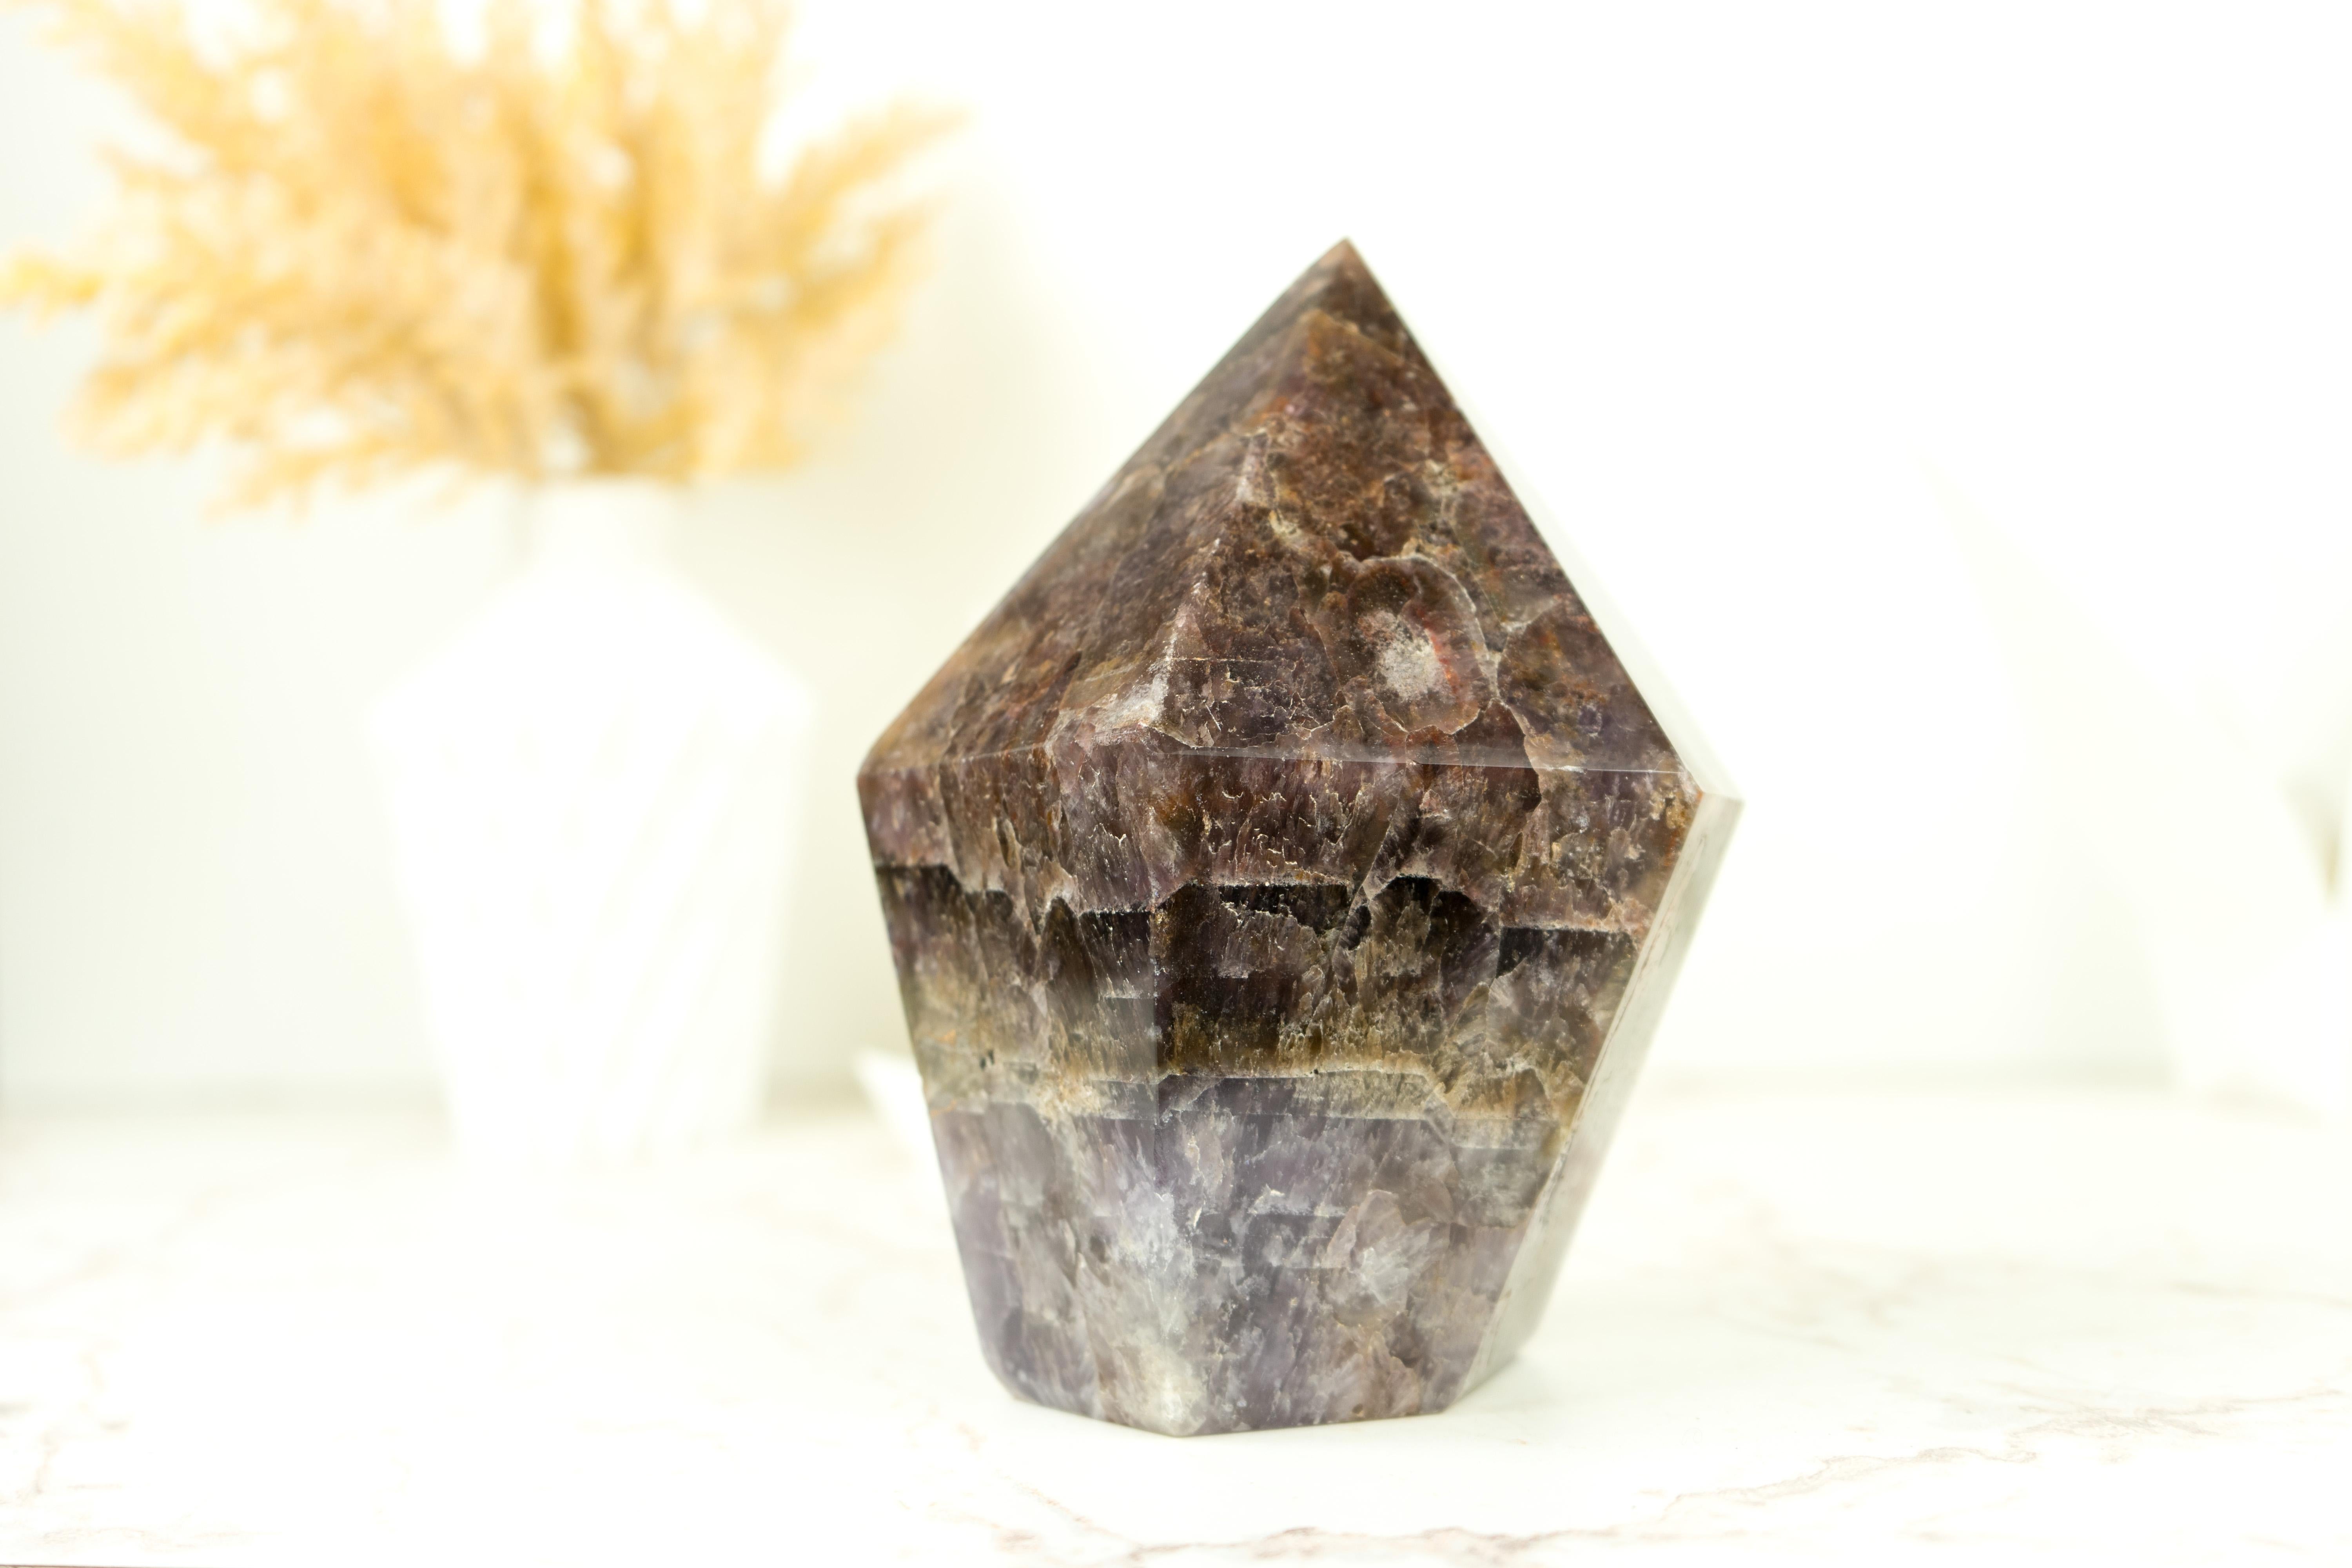 An X-Large Super Seven Scepter Generator, this self-standing point is a remarkable specimen that showcases both impressive size and unique characteristics. This Super 7 crystal is not only a natural wonder but also a desirable addition to any